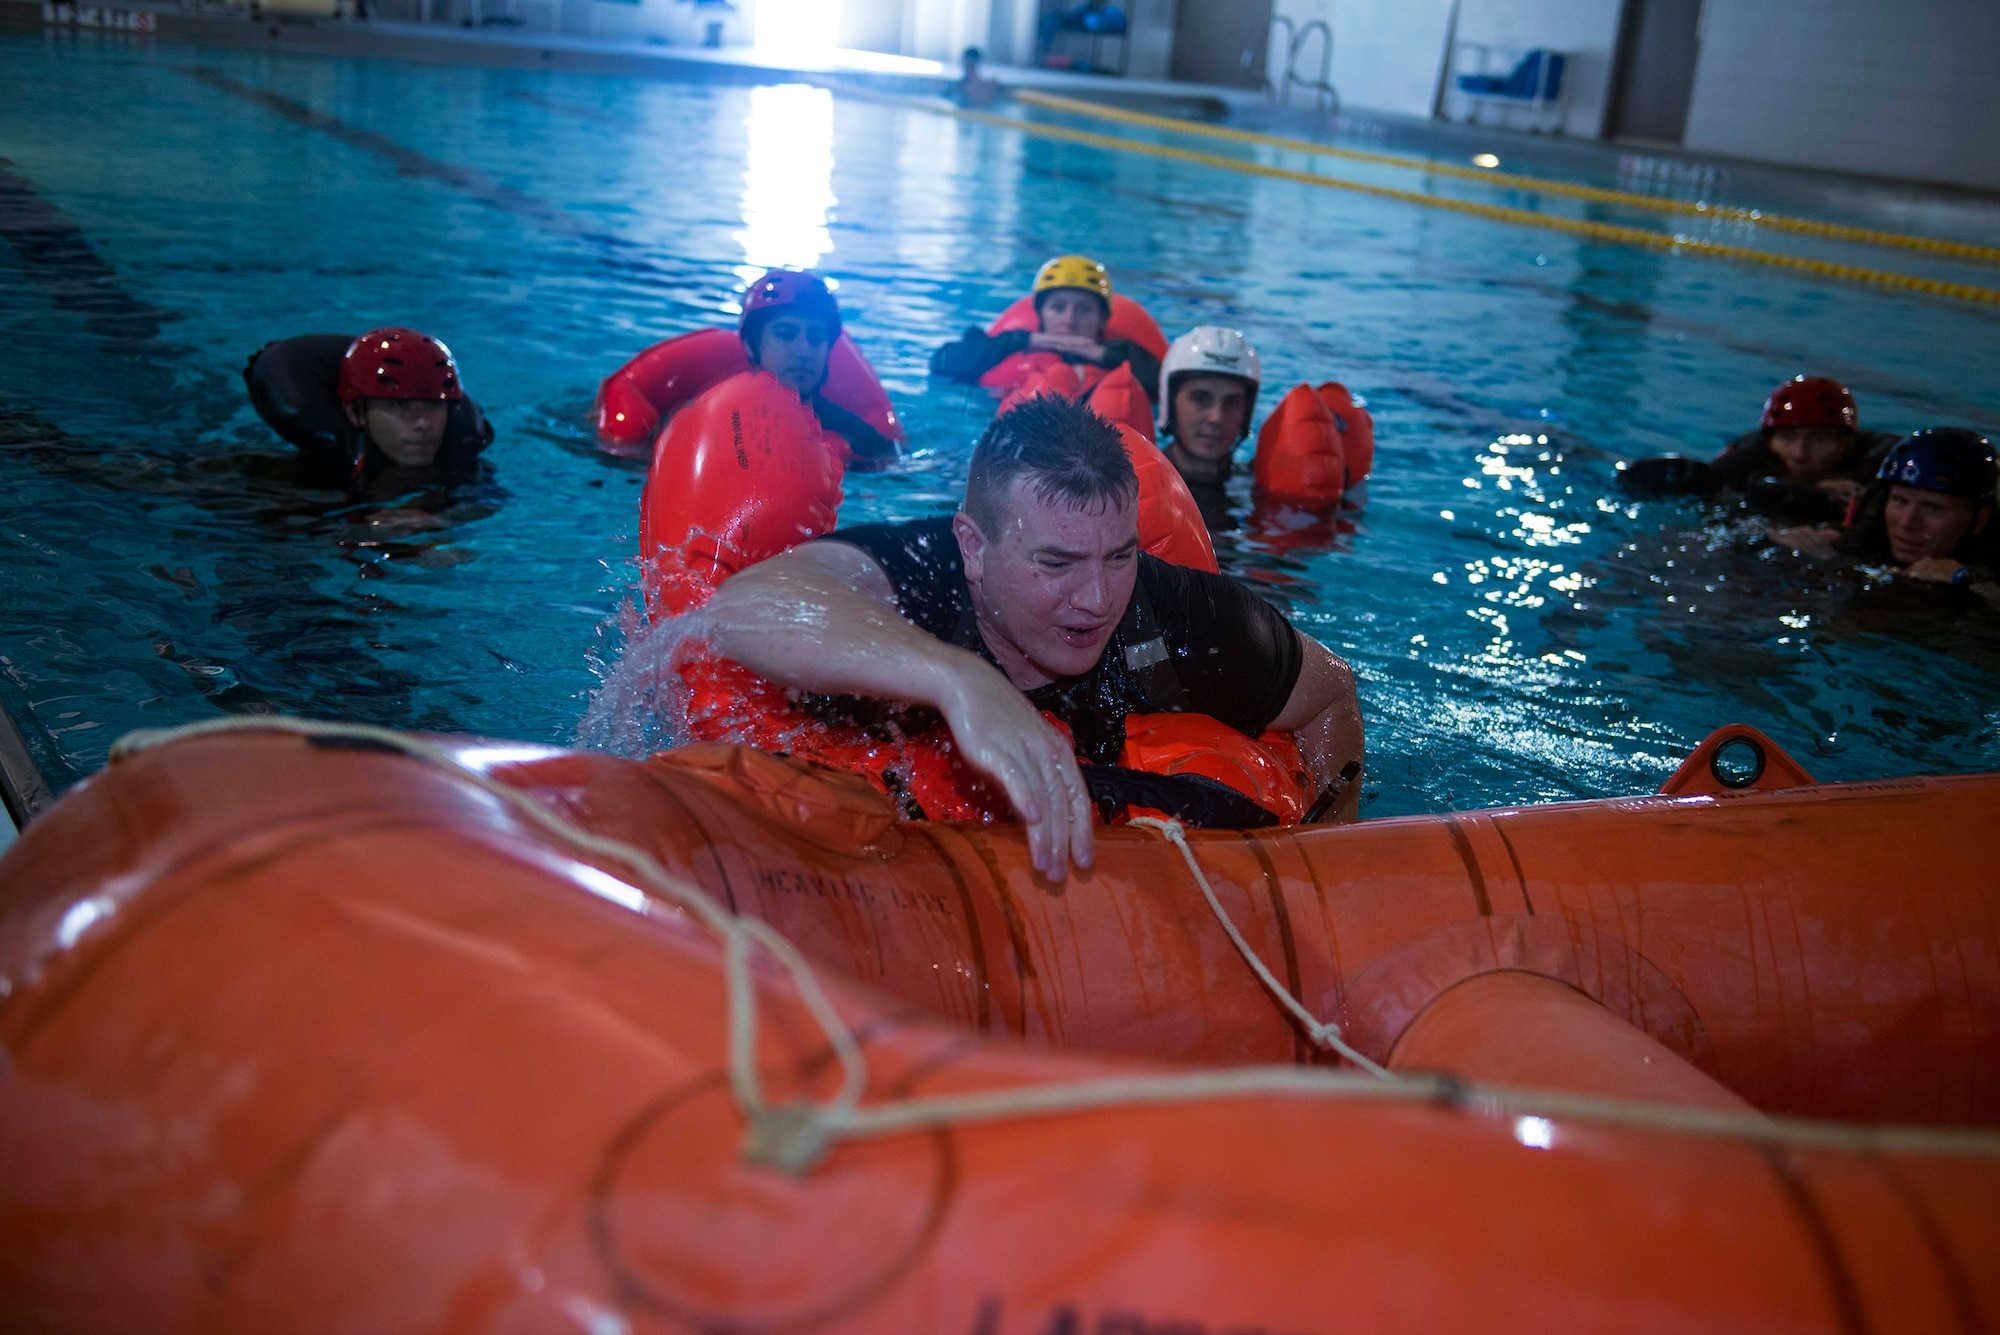 U.S. Air Force Tech. Sgt. Travis Siegwart, 347th Operations Support Squadron NCO in charge of survival, evasion, resistance and escape training, climbs into a raft during water survival training, Sept. 15, 2016, at Moody Air Force Base, Ga. The Michigan native’s rural upbringing and interest in his father’s stories from his Air Force career as an air crew member helped develop his passion in the SERE career field. (U.S. Air Force photo by Airman 1st Class Greg Nash)